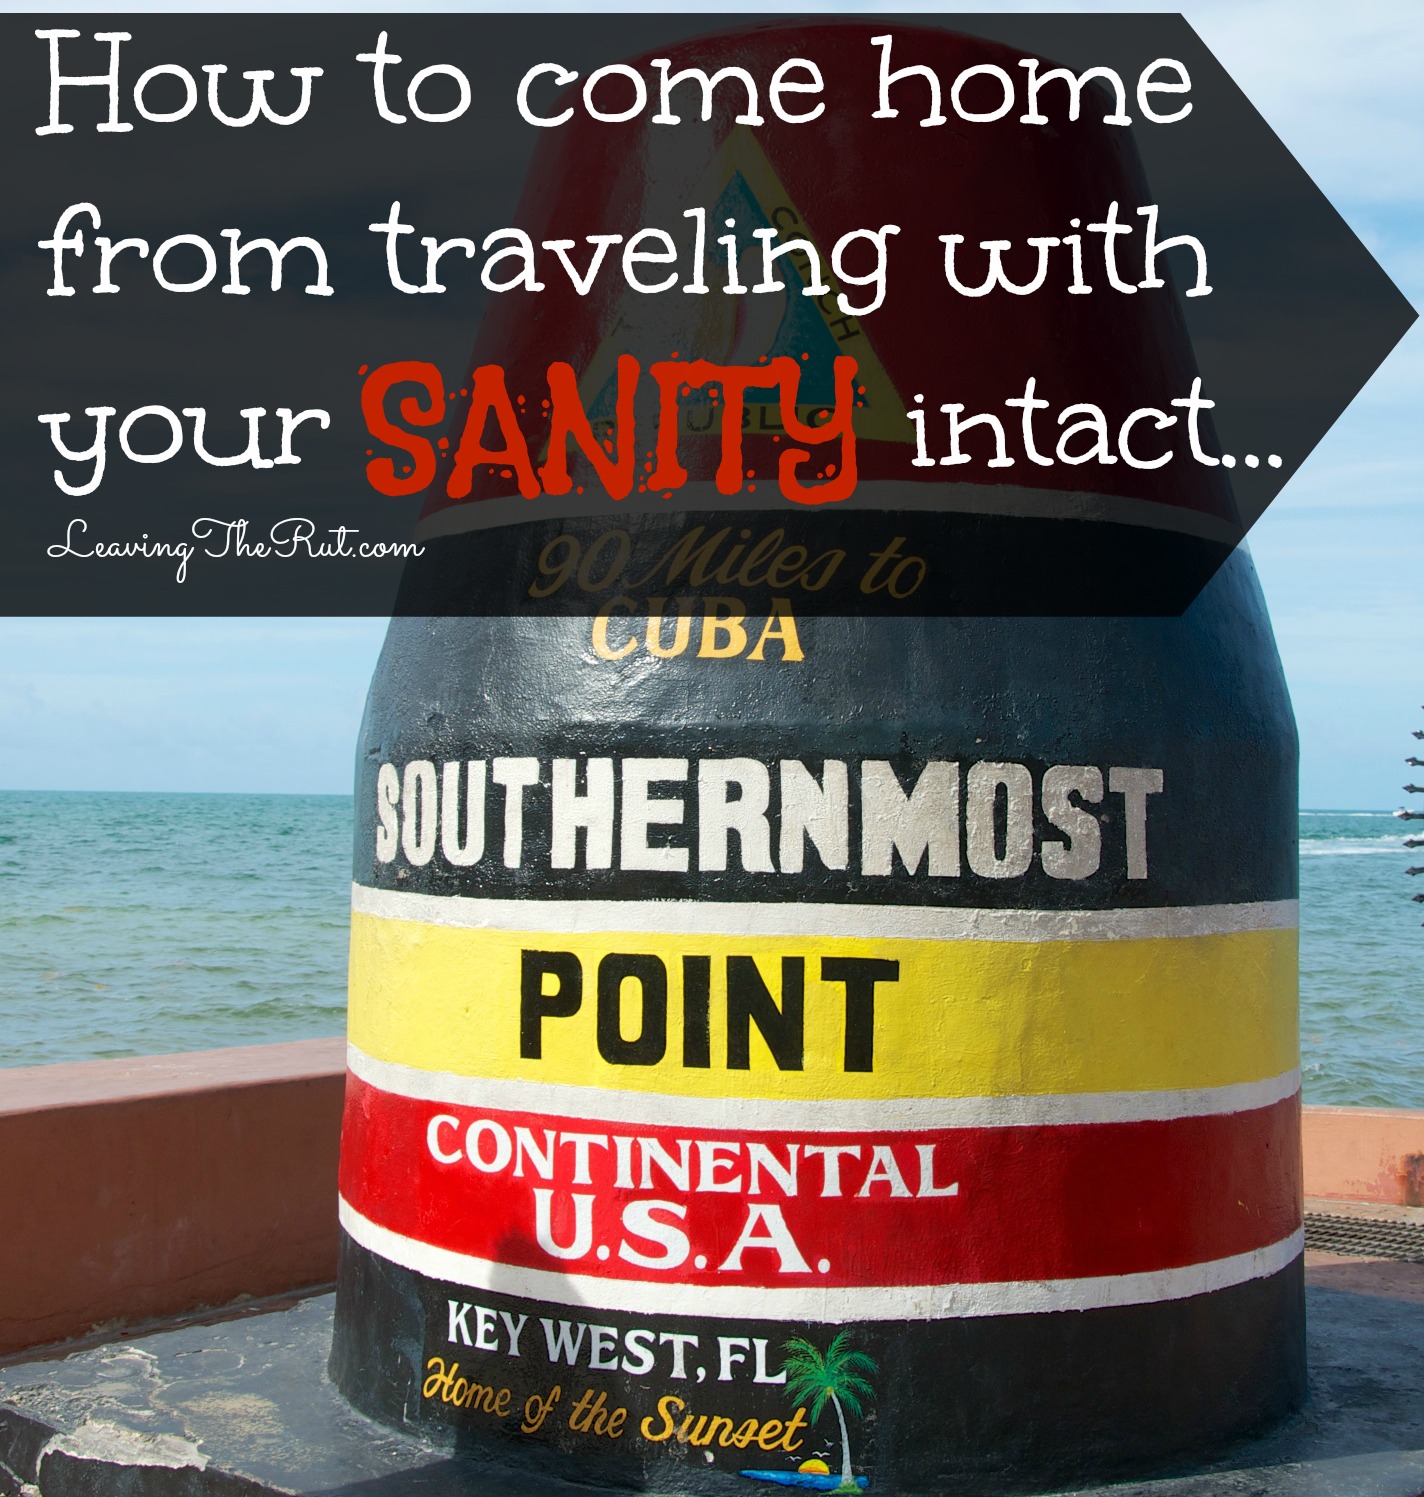 How to come home from traveling with your sanity intact